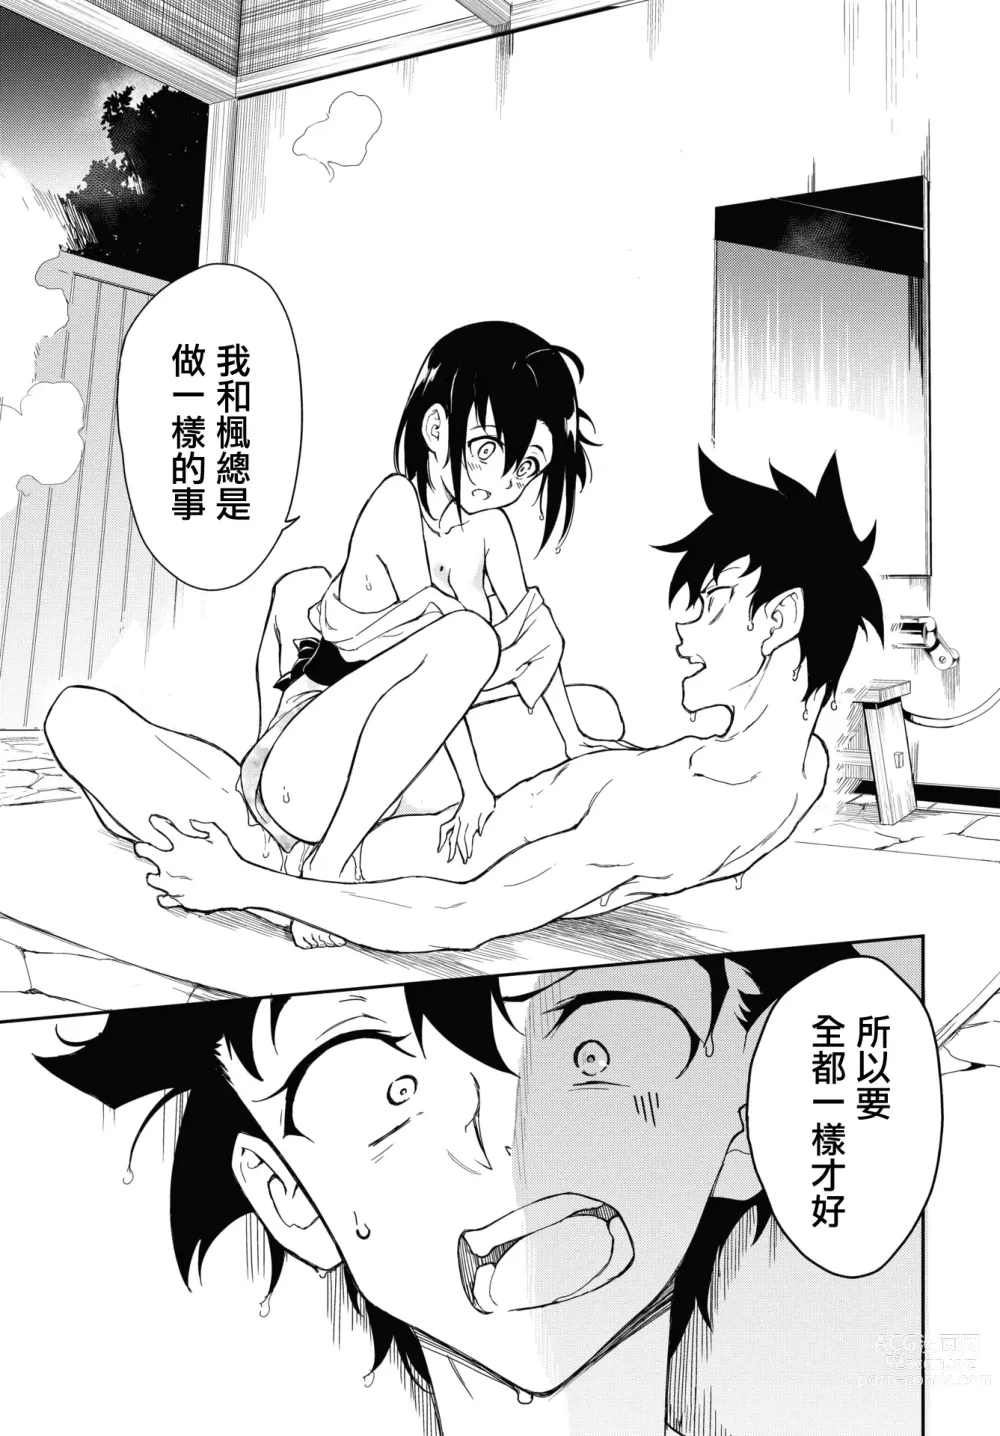 Page 176 of doujinshi 楓と鈴 1-7